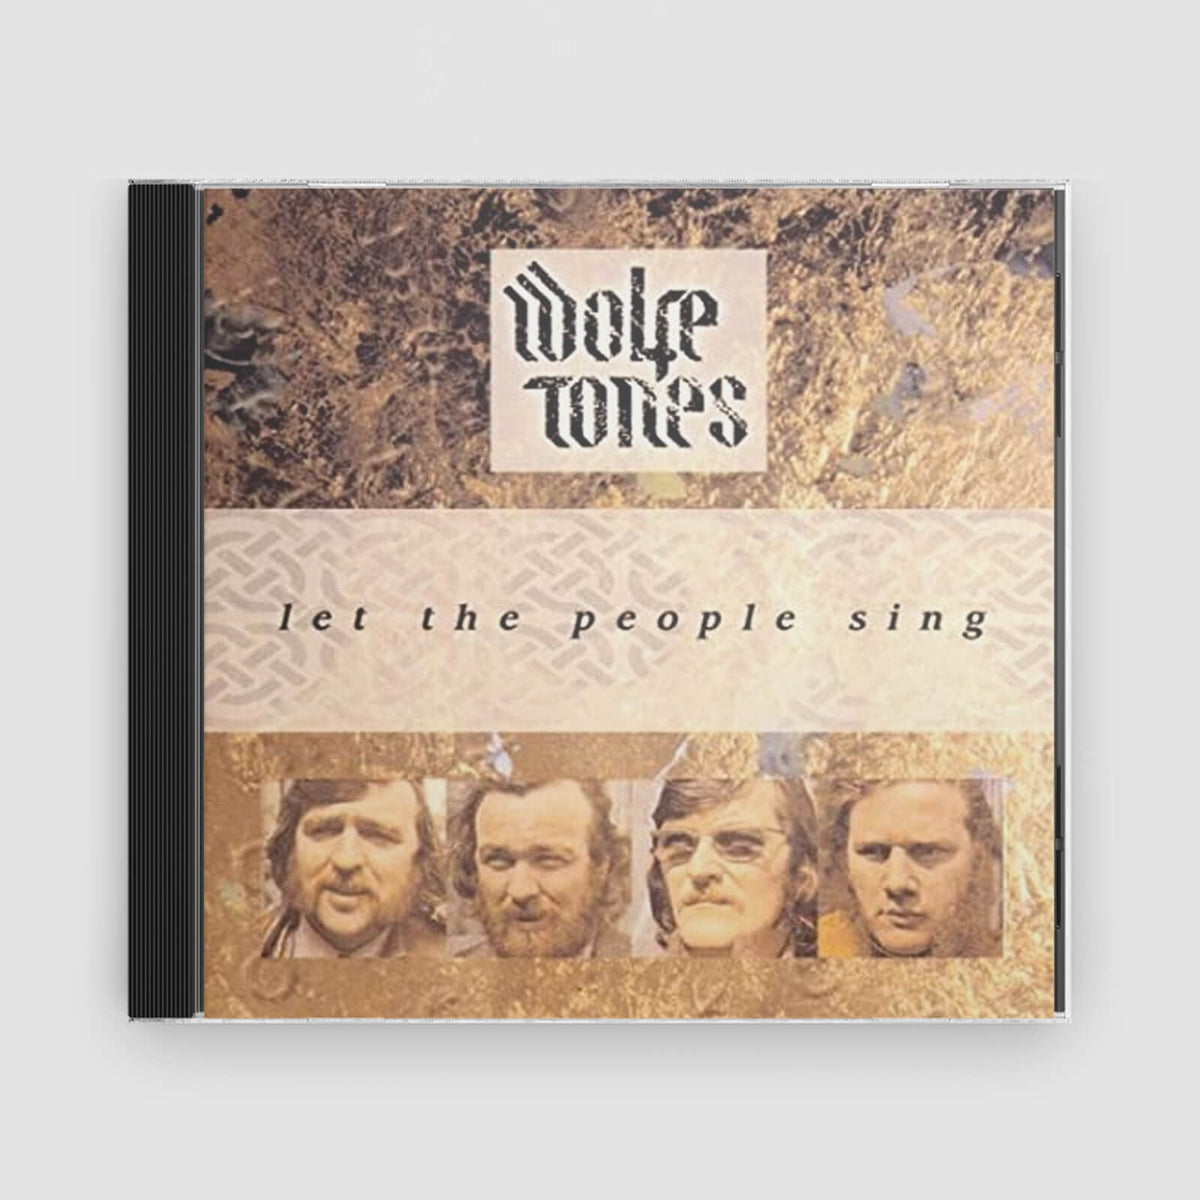 The Wolfe Tones : Let the People SIng (CD)